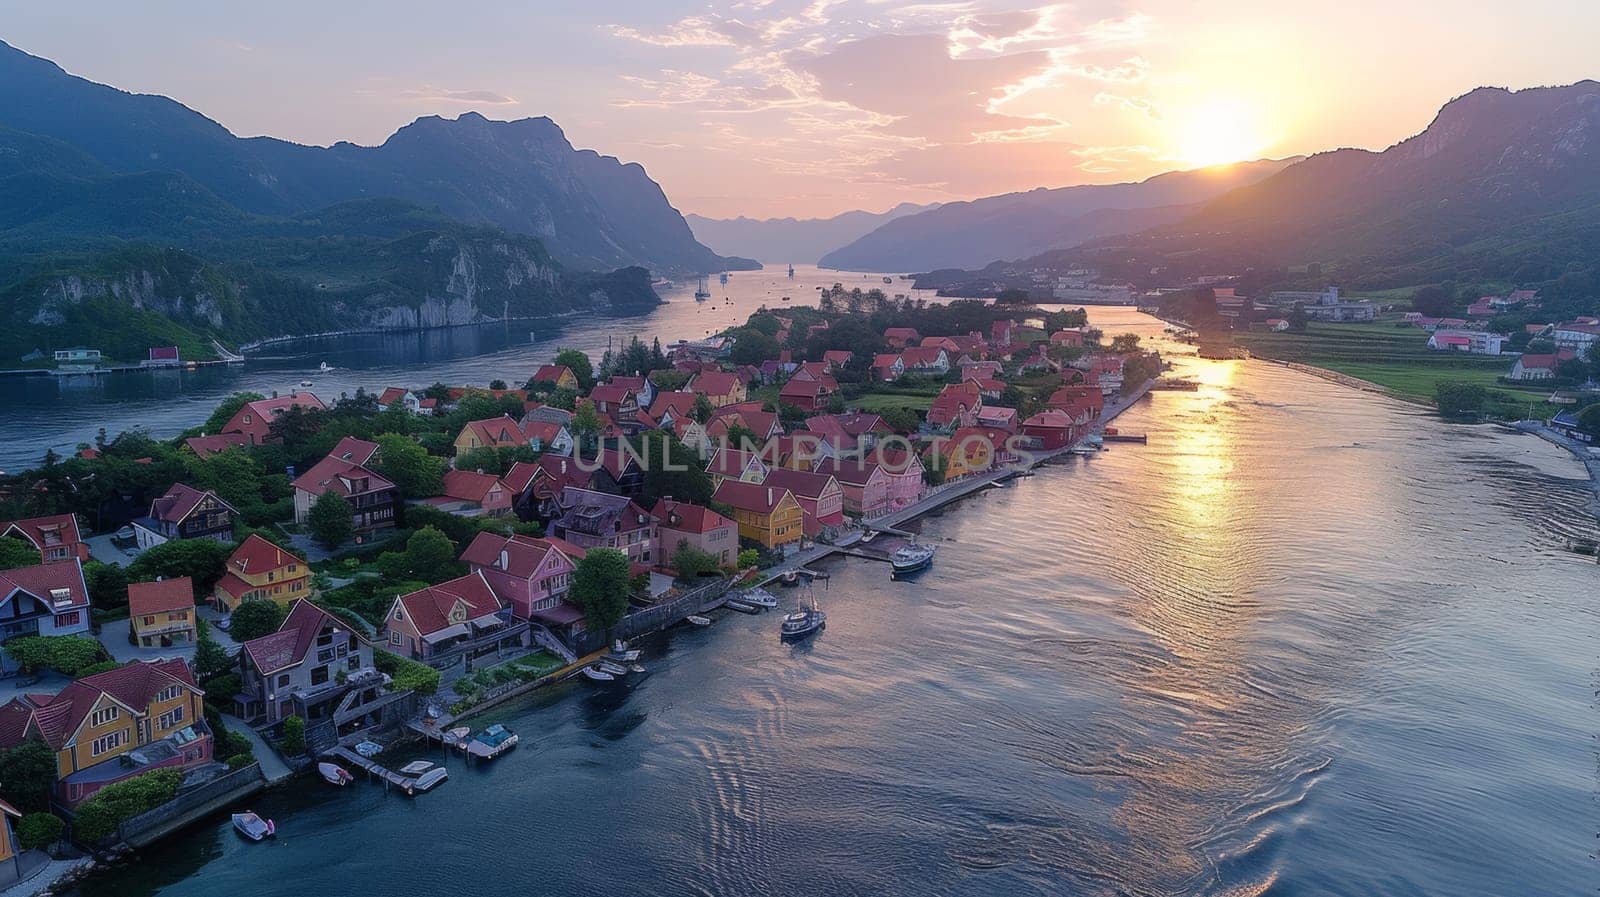 A view of a beautiful sunset over the water and houses